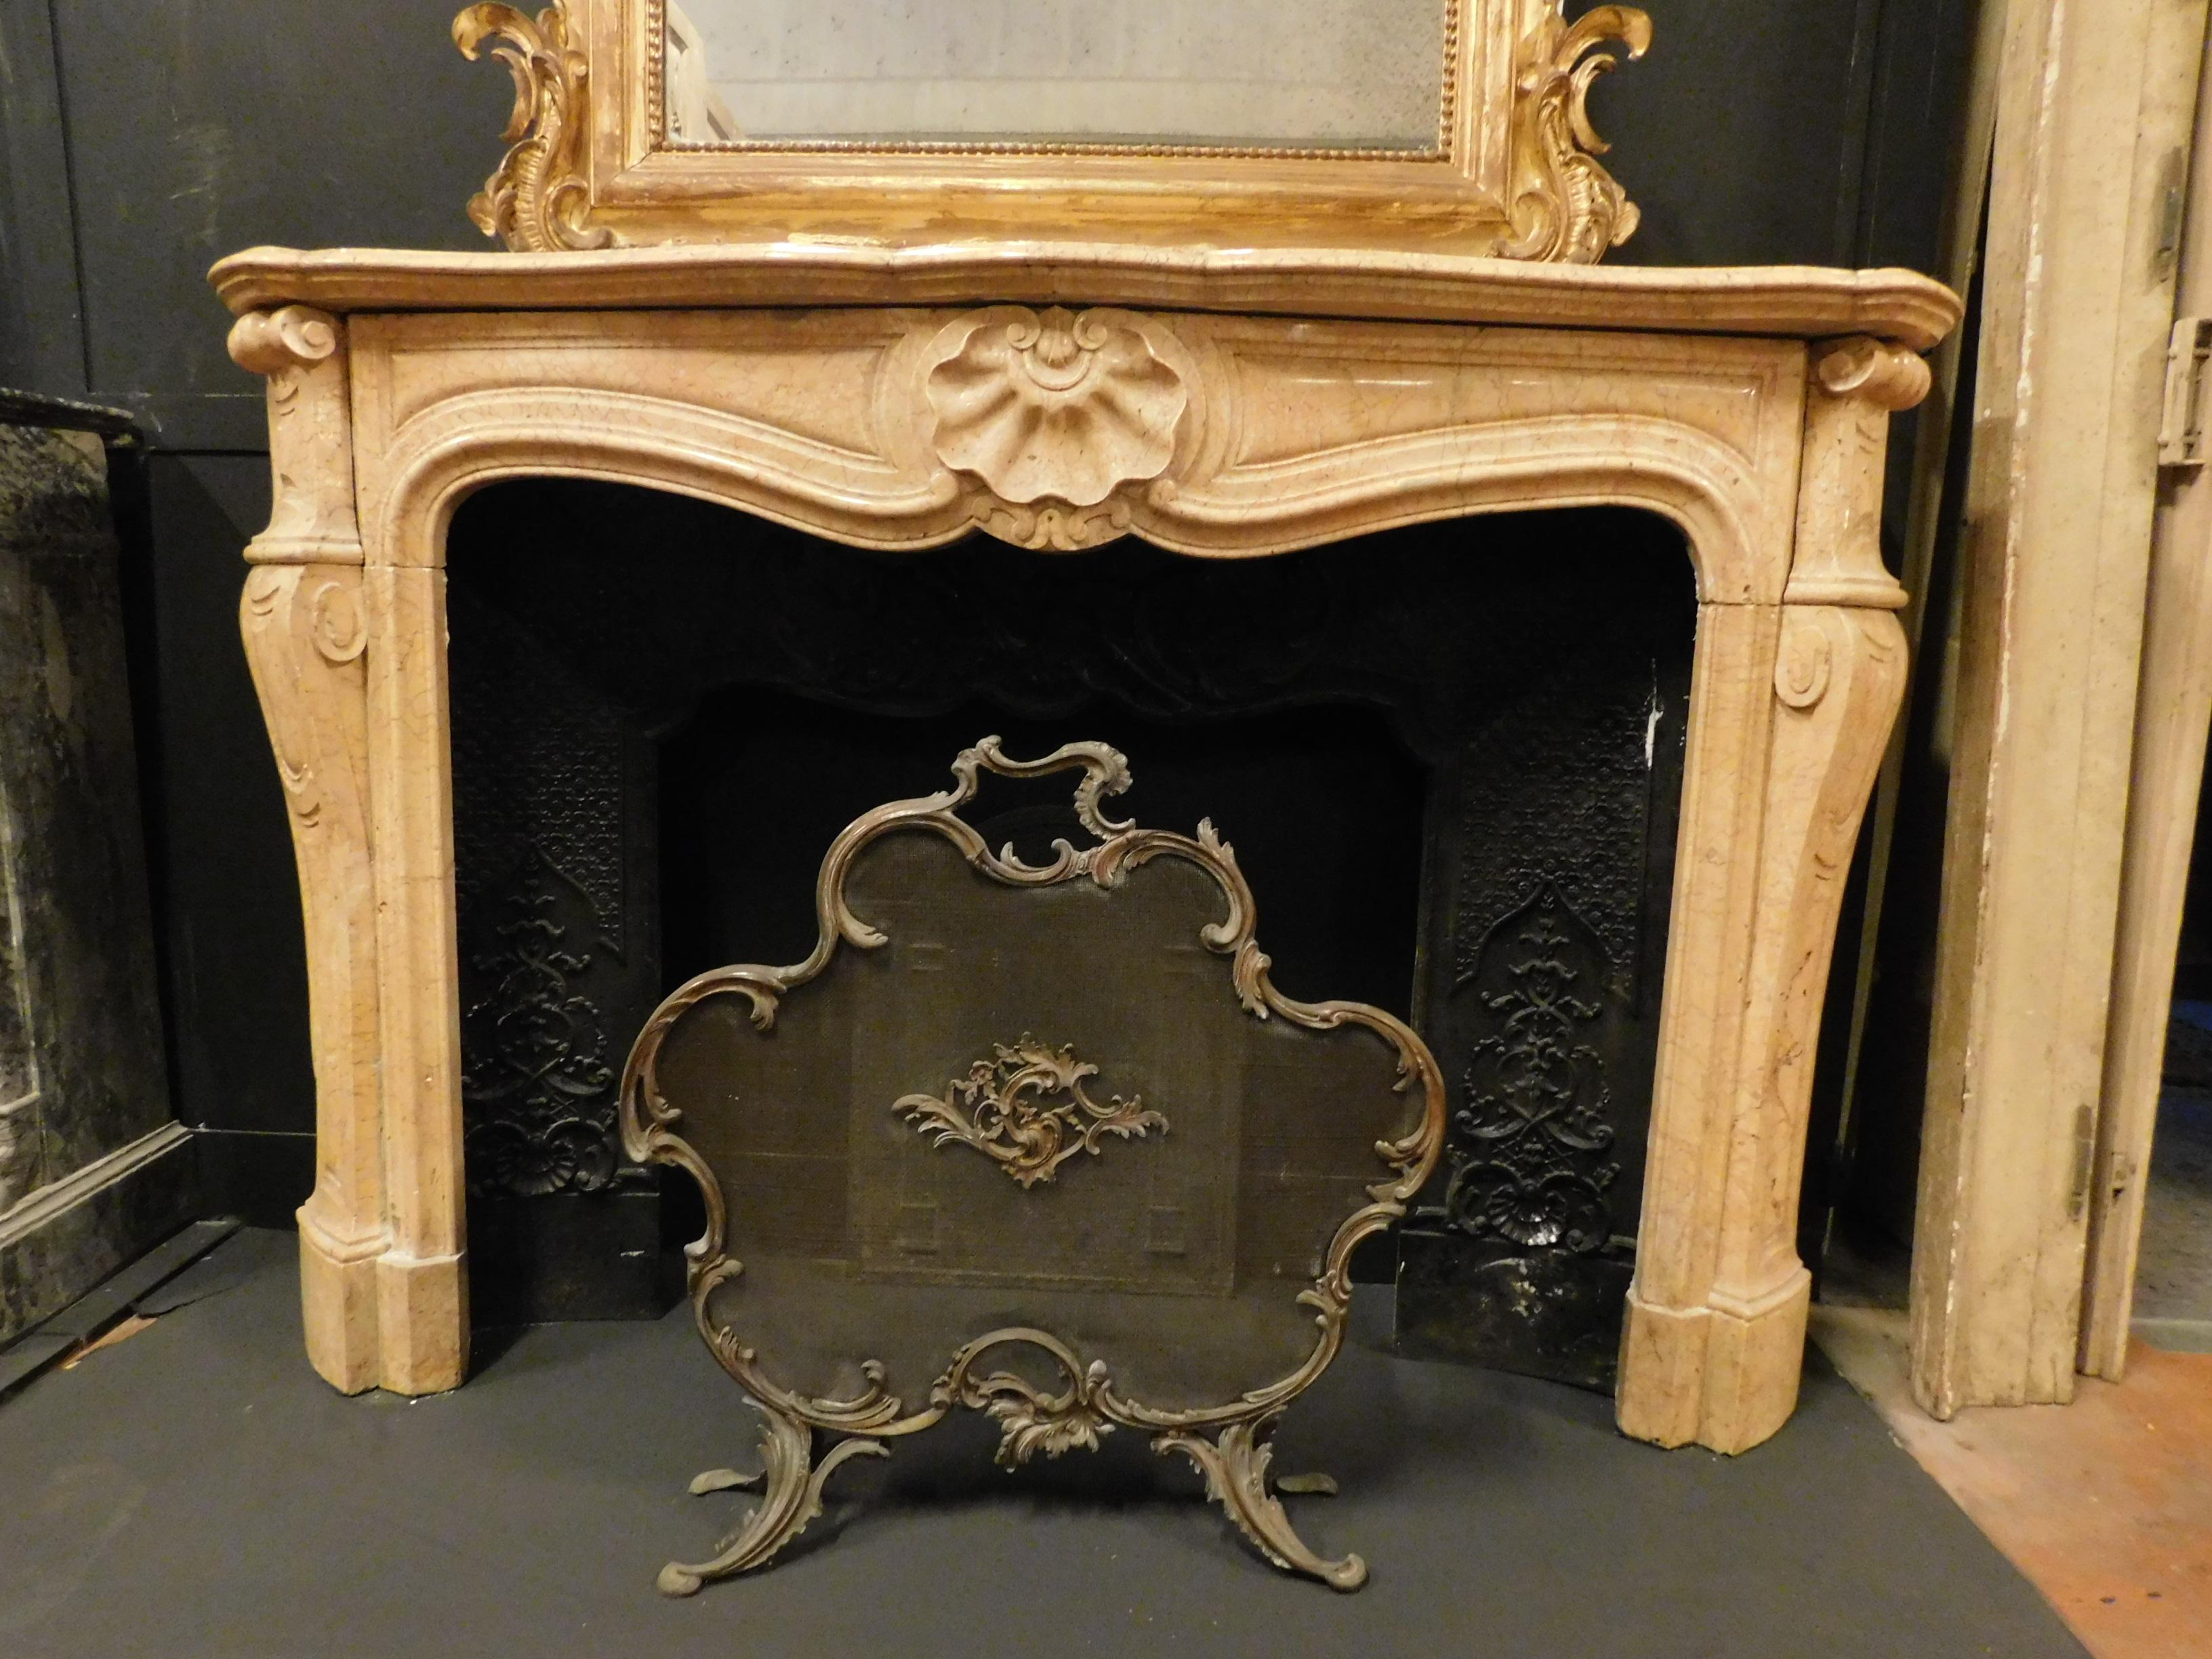 Antique mantel fireplace, in yellow breccia marble, hand-carved with classic shapes of central console and wavy legs on the sides, built in the mid-19th century in France.
Maximum measure cm W 159 x H 110 x D 36.